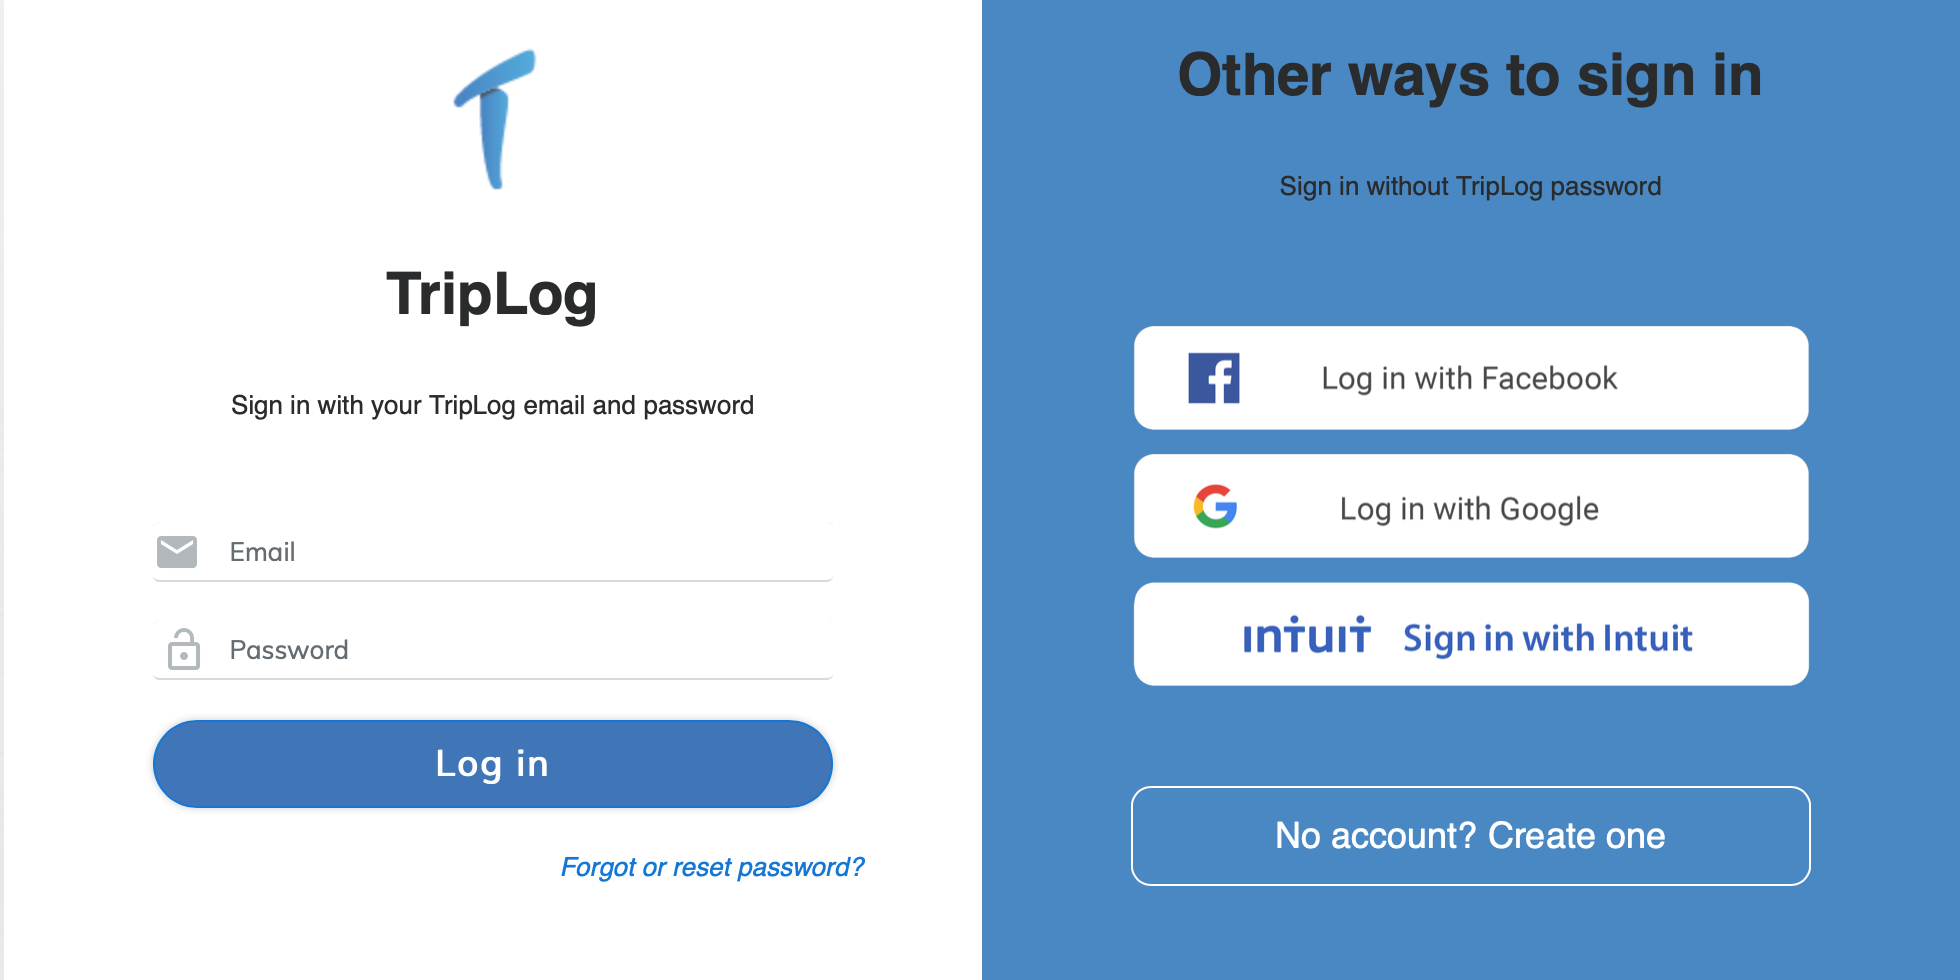 TripLog now integrates with Google and Facebook logins